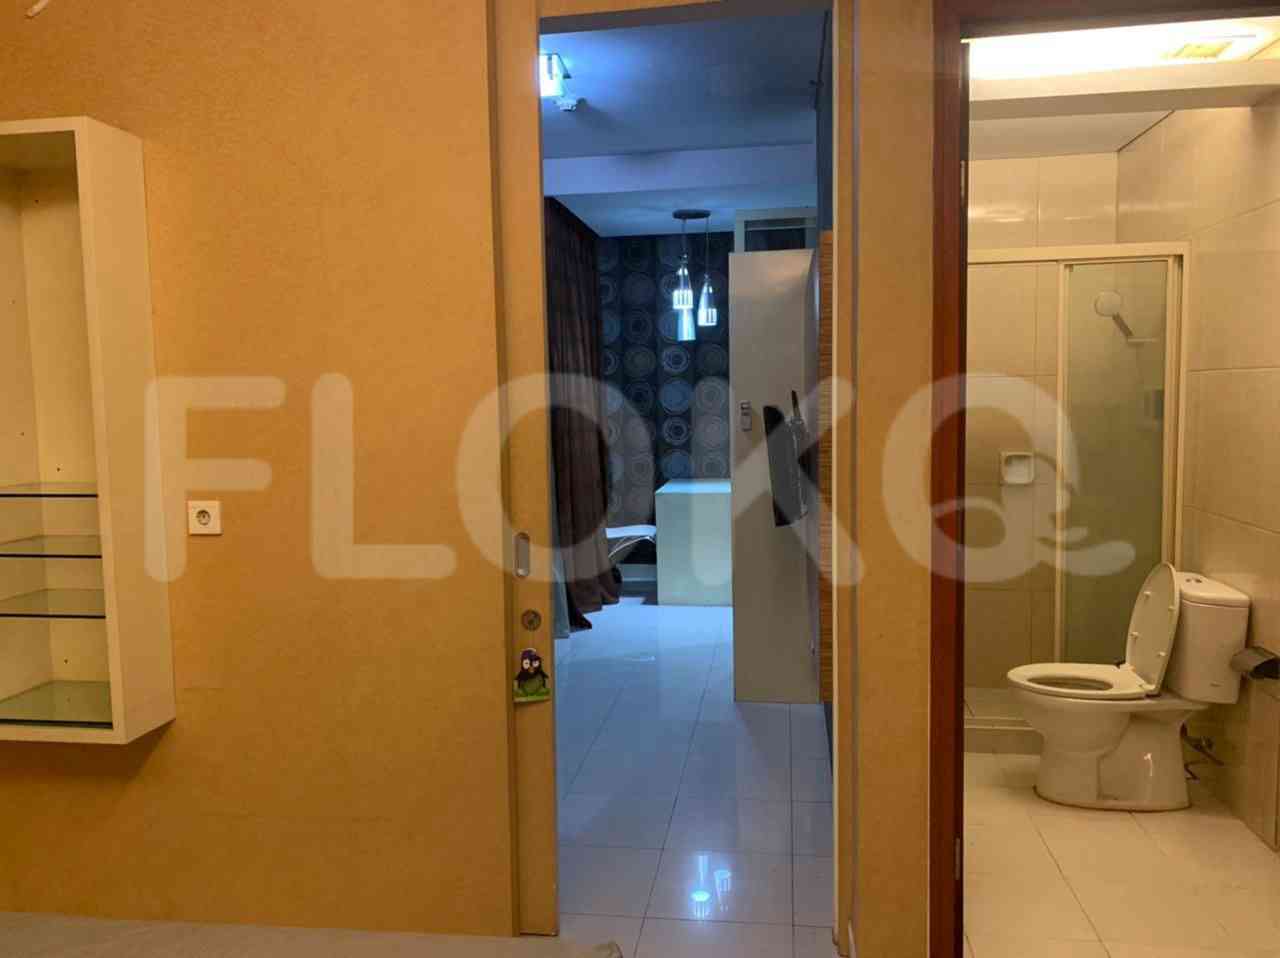 1 Bedroom on 6th Floor for Rent in Kuningan Place Apartment - fkued1 9